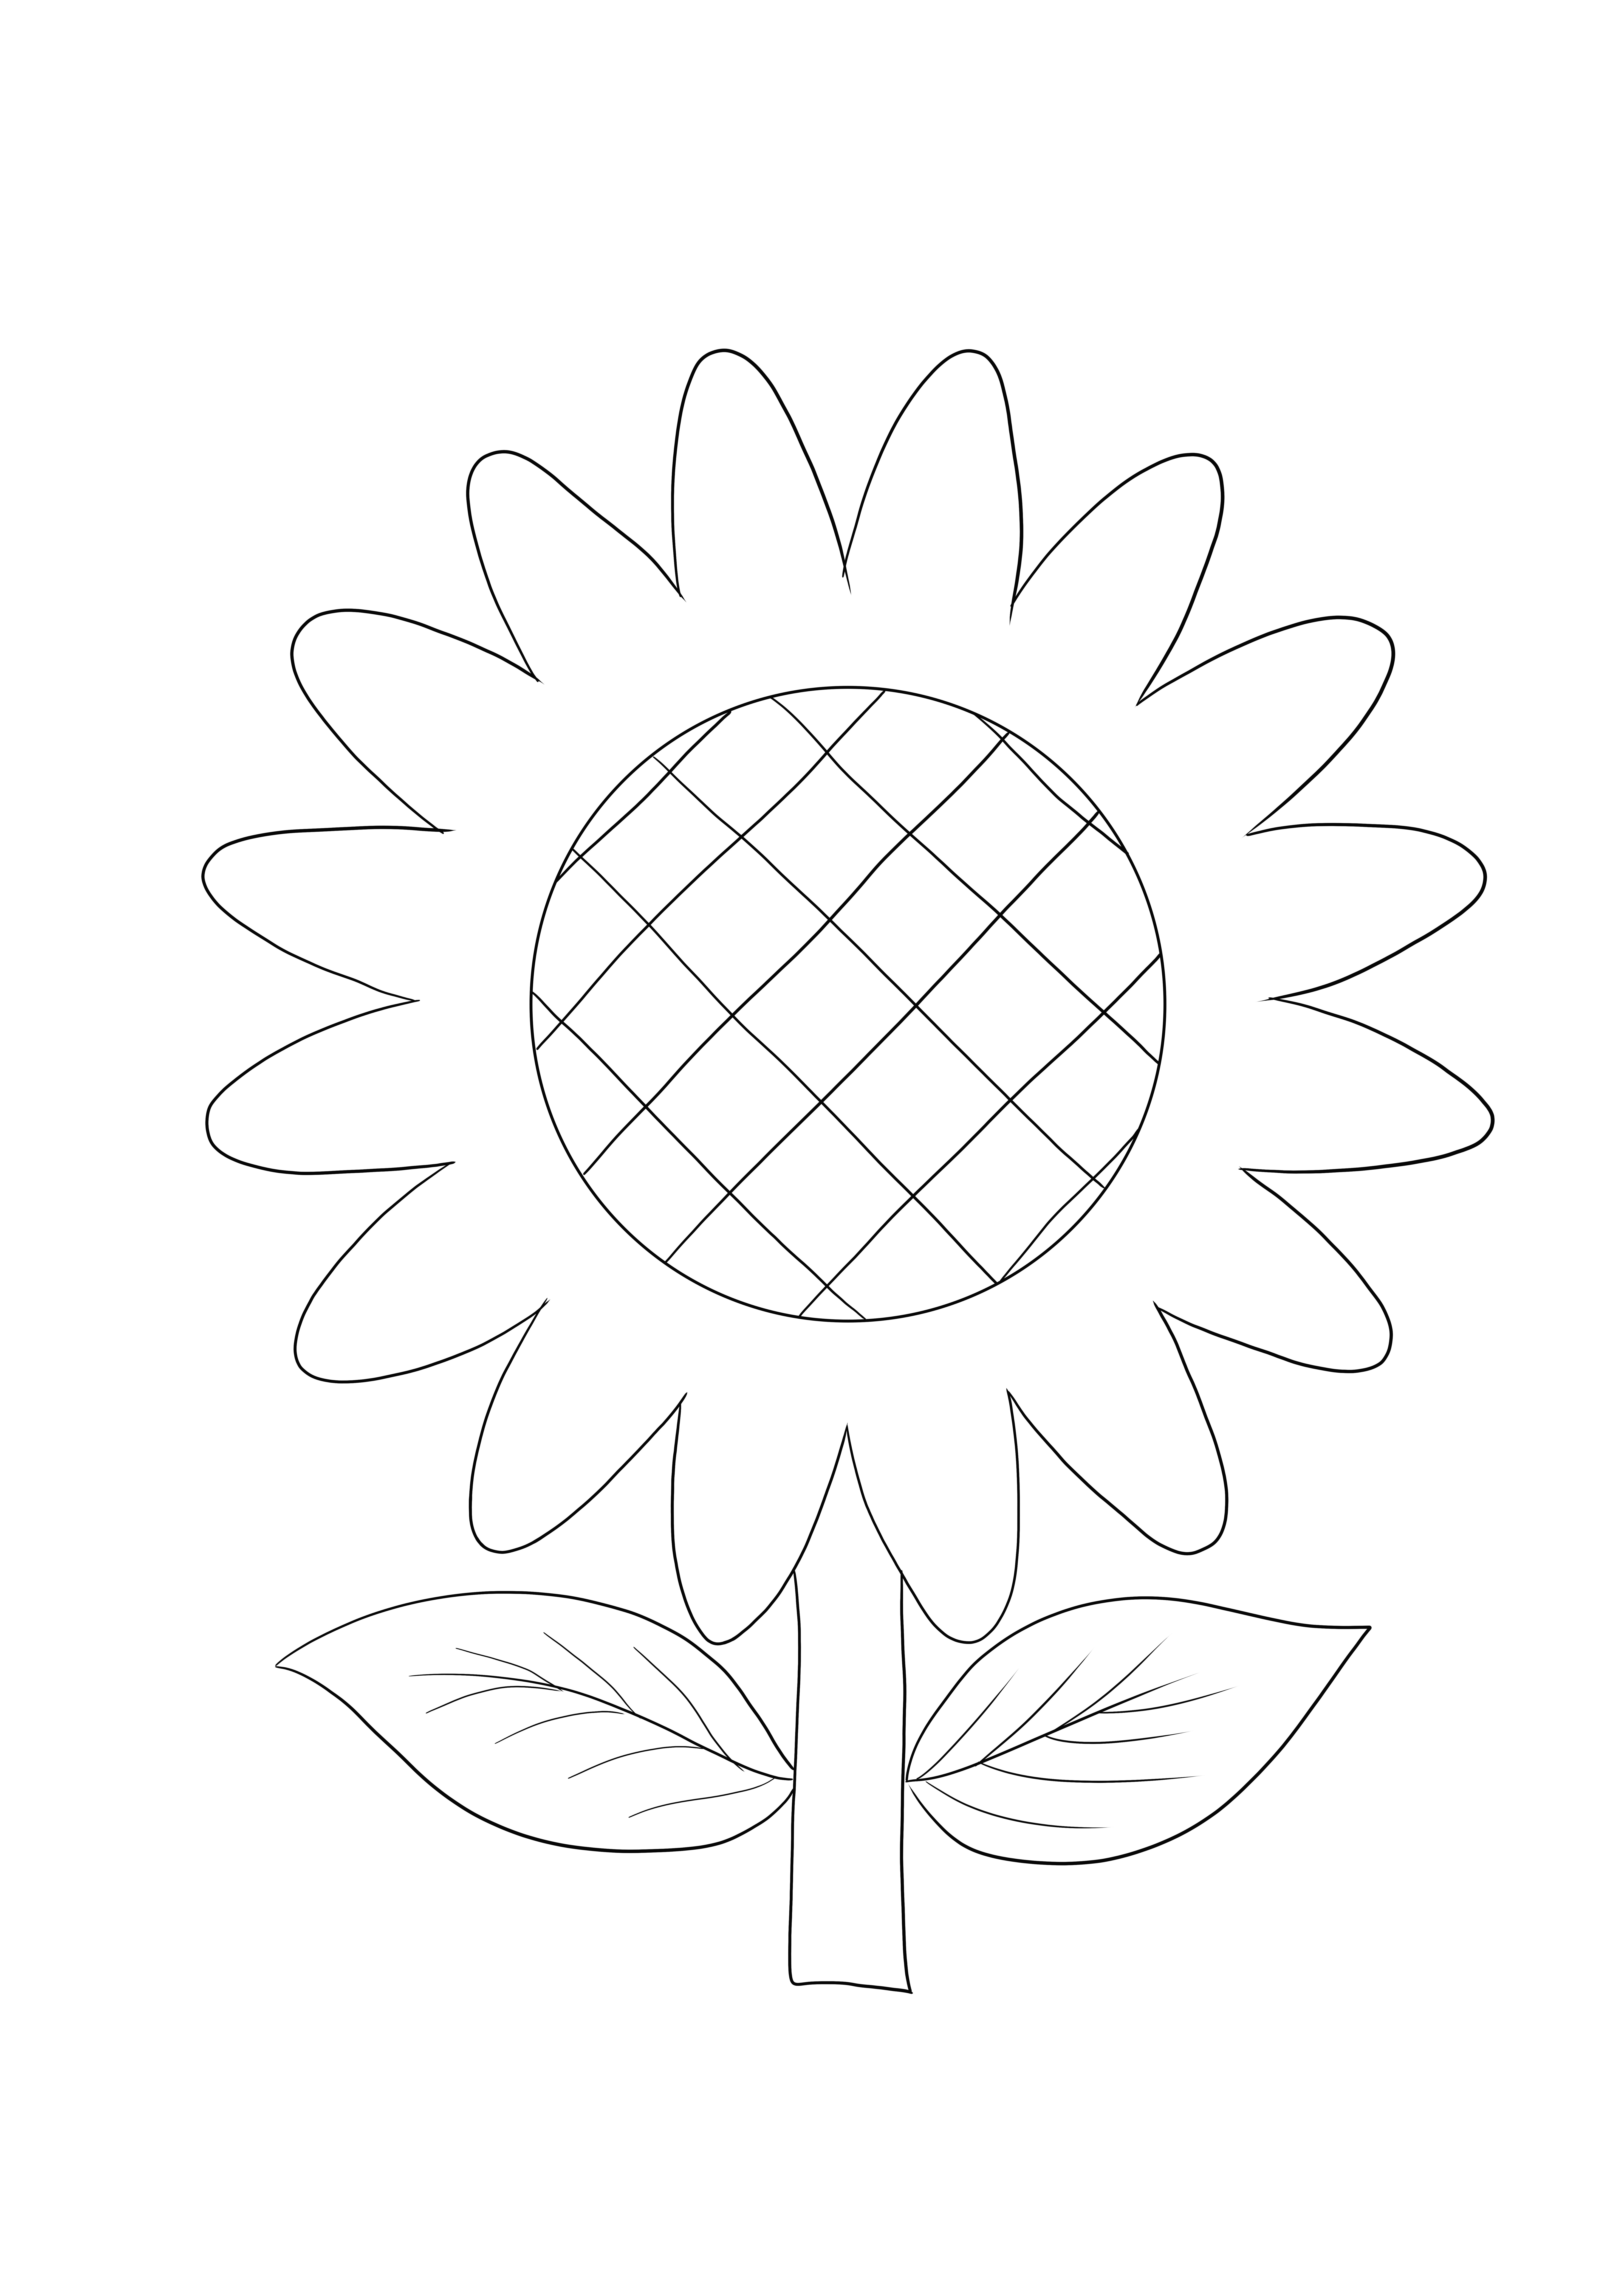 Sunflower Emoji to print for free for children of all ages